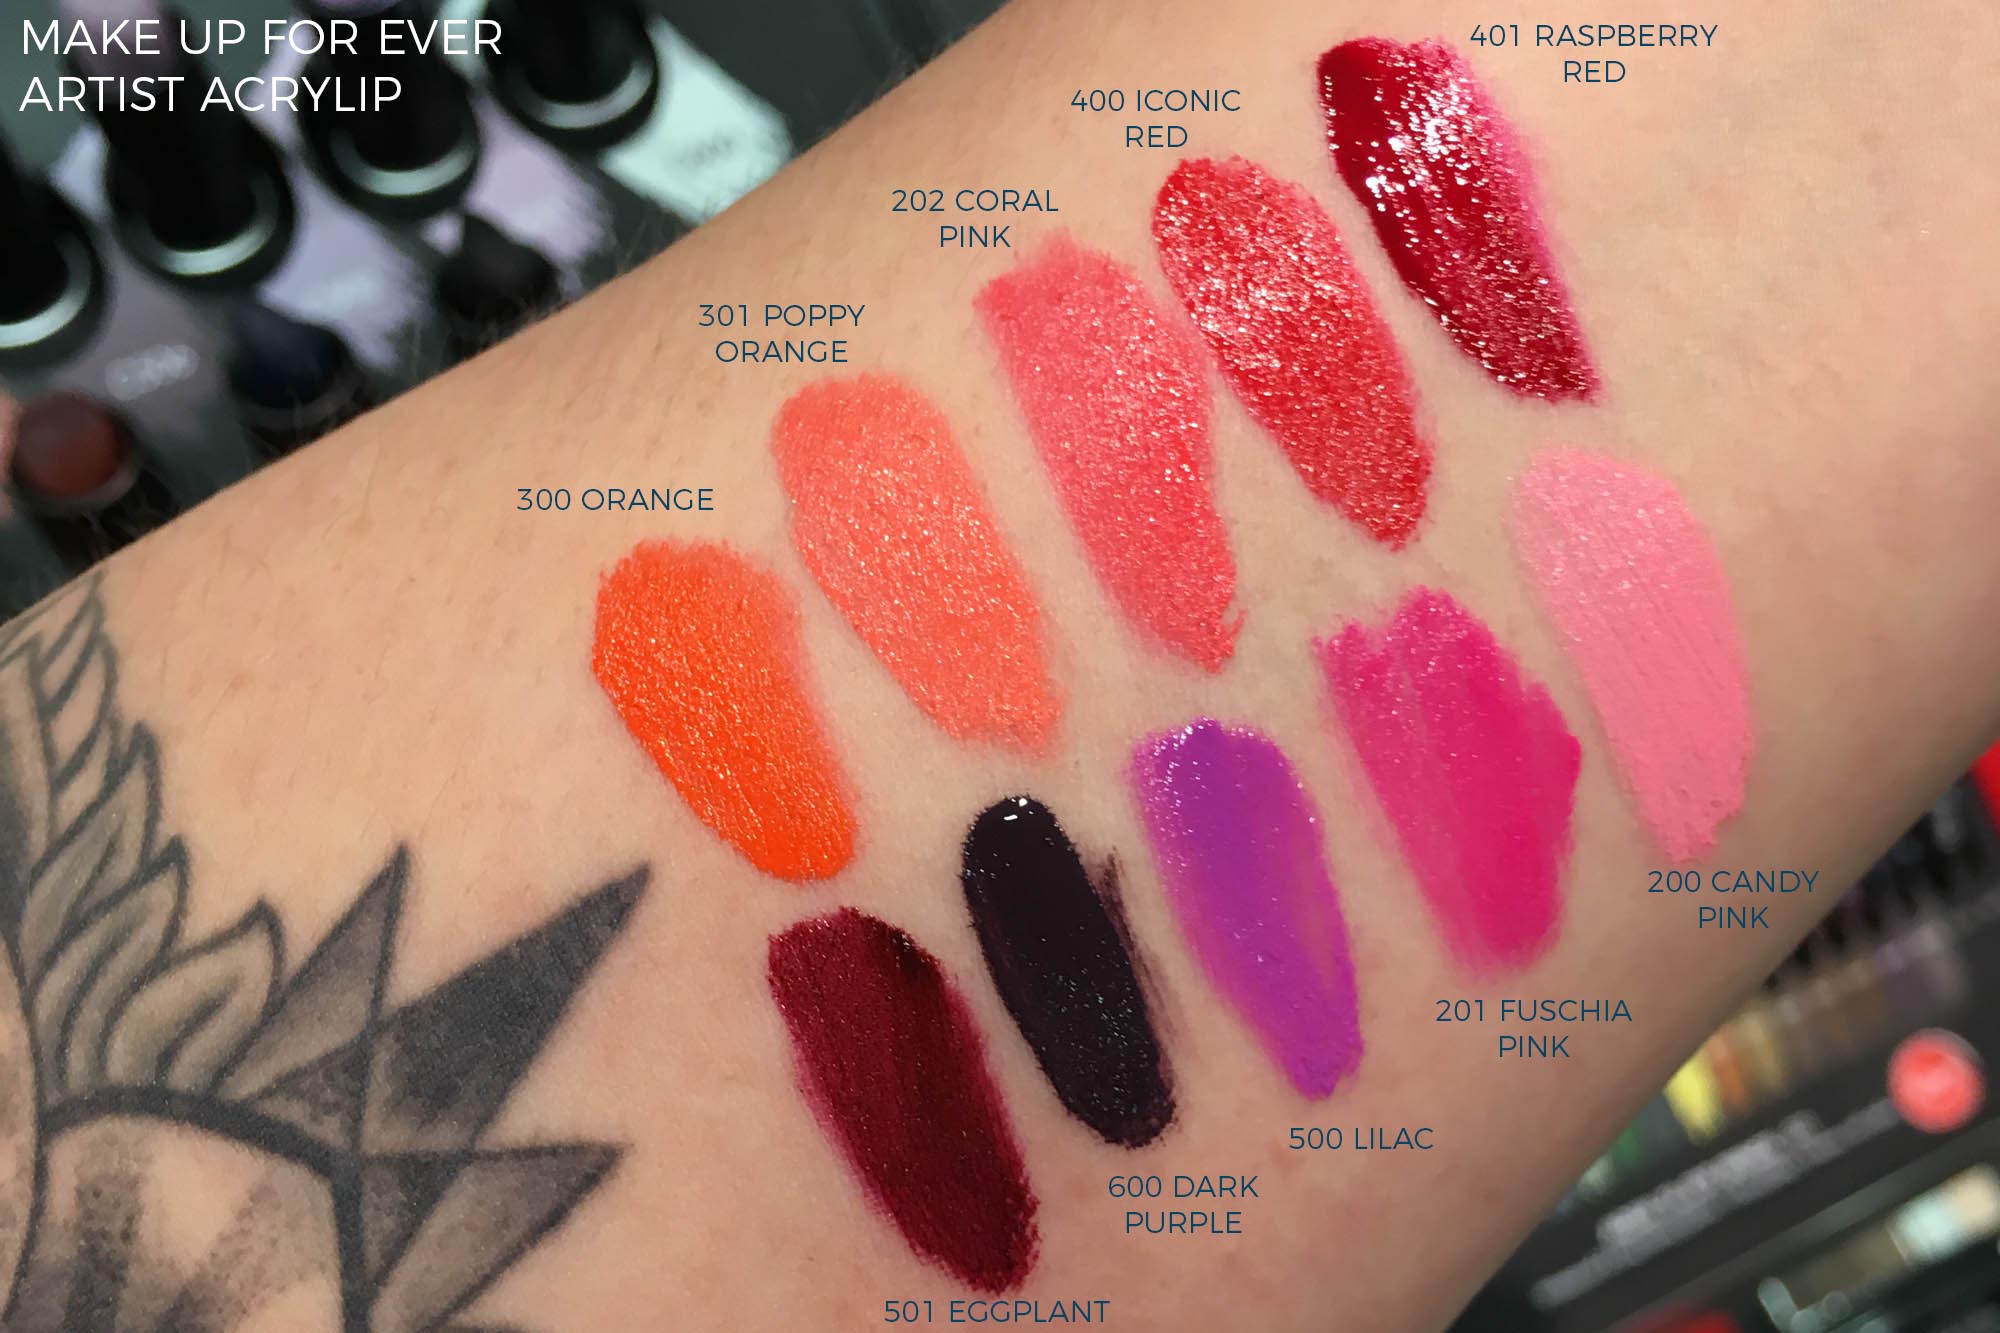 Lip swatches galore - Make Up For Ever Artist Acrylip